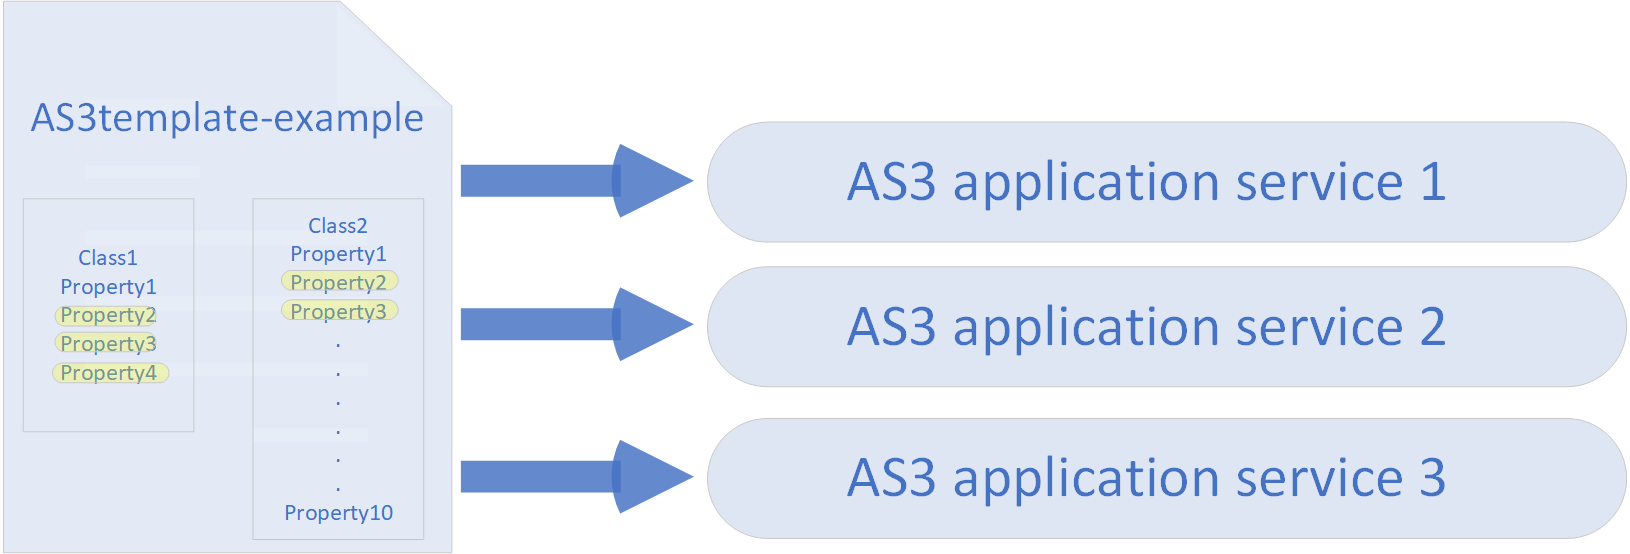 AS3 template architecture